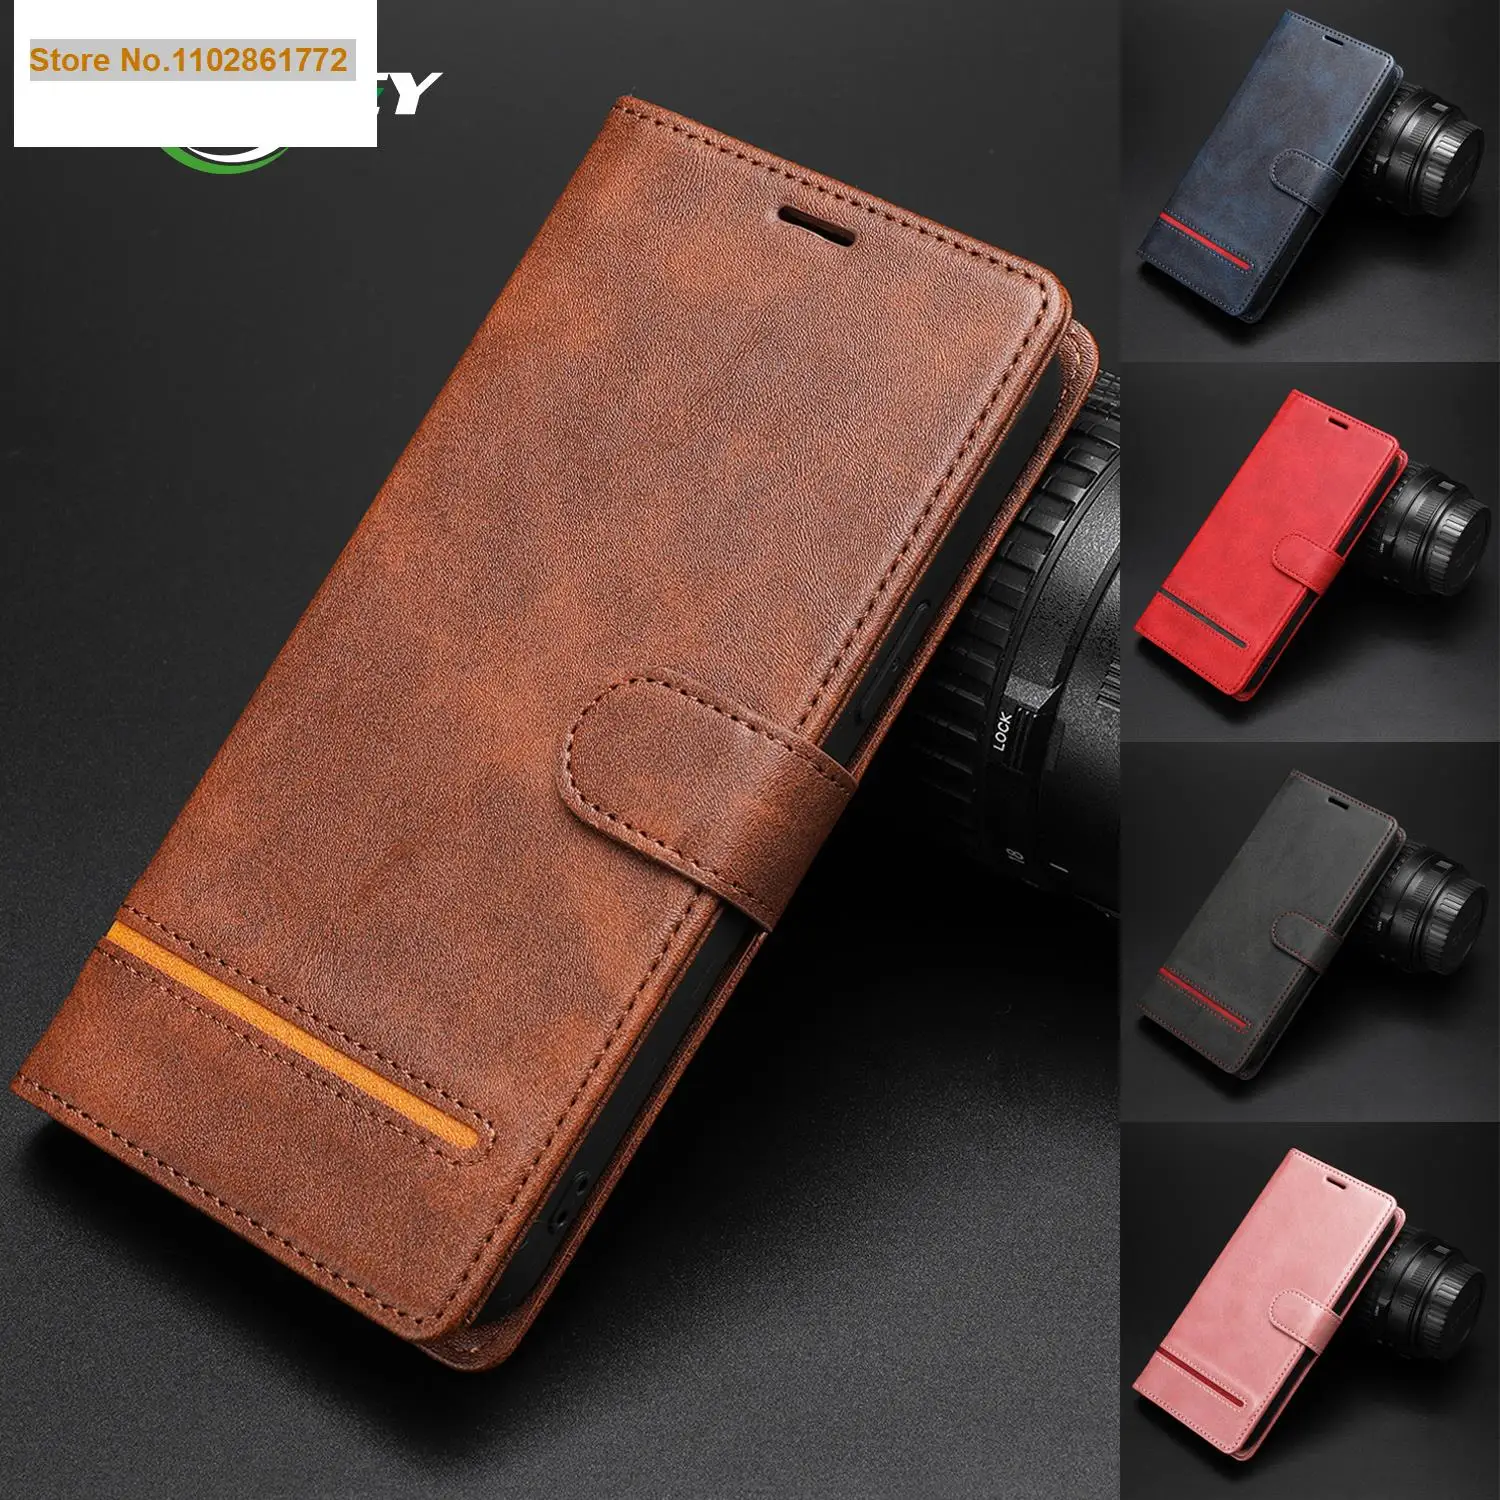 

Leather Flip Phone Bag Case For Samsung Galaxy A71 A51 A31 A21 A70 A50 A40 A30 S A20 A10 Luxury Wallet Magnetic Card Slots Cover